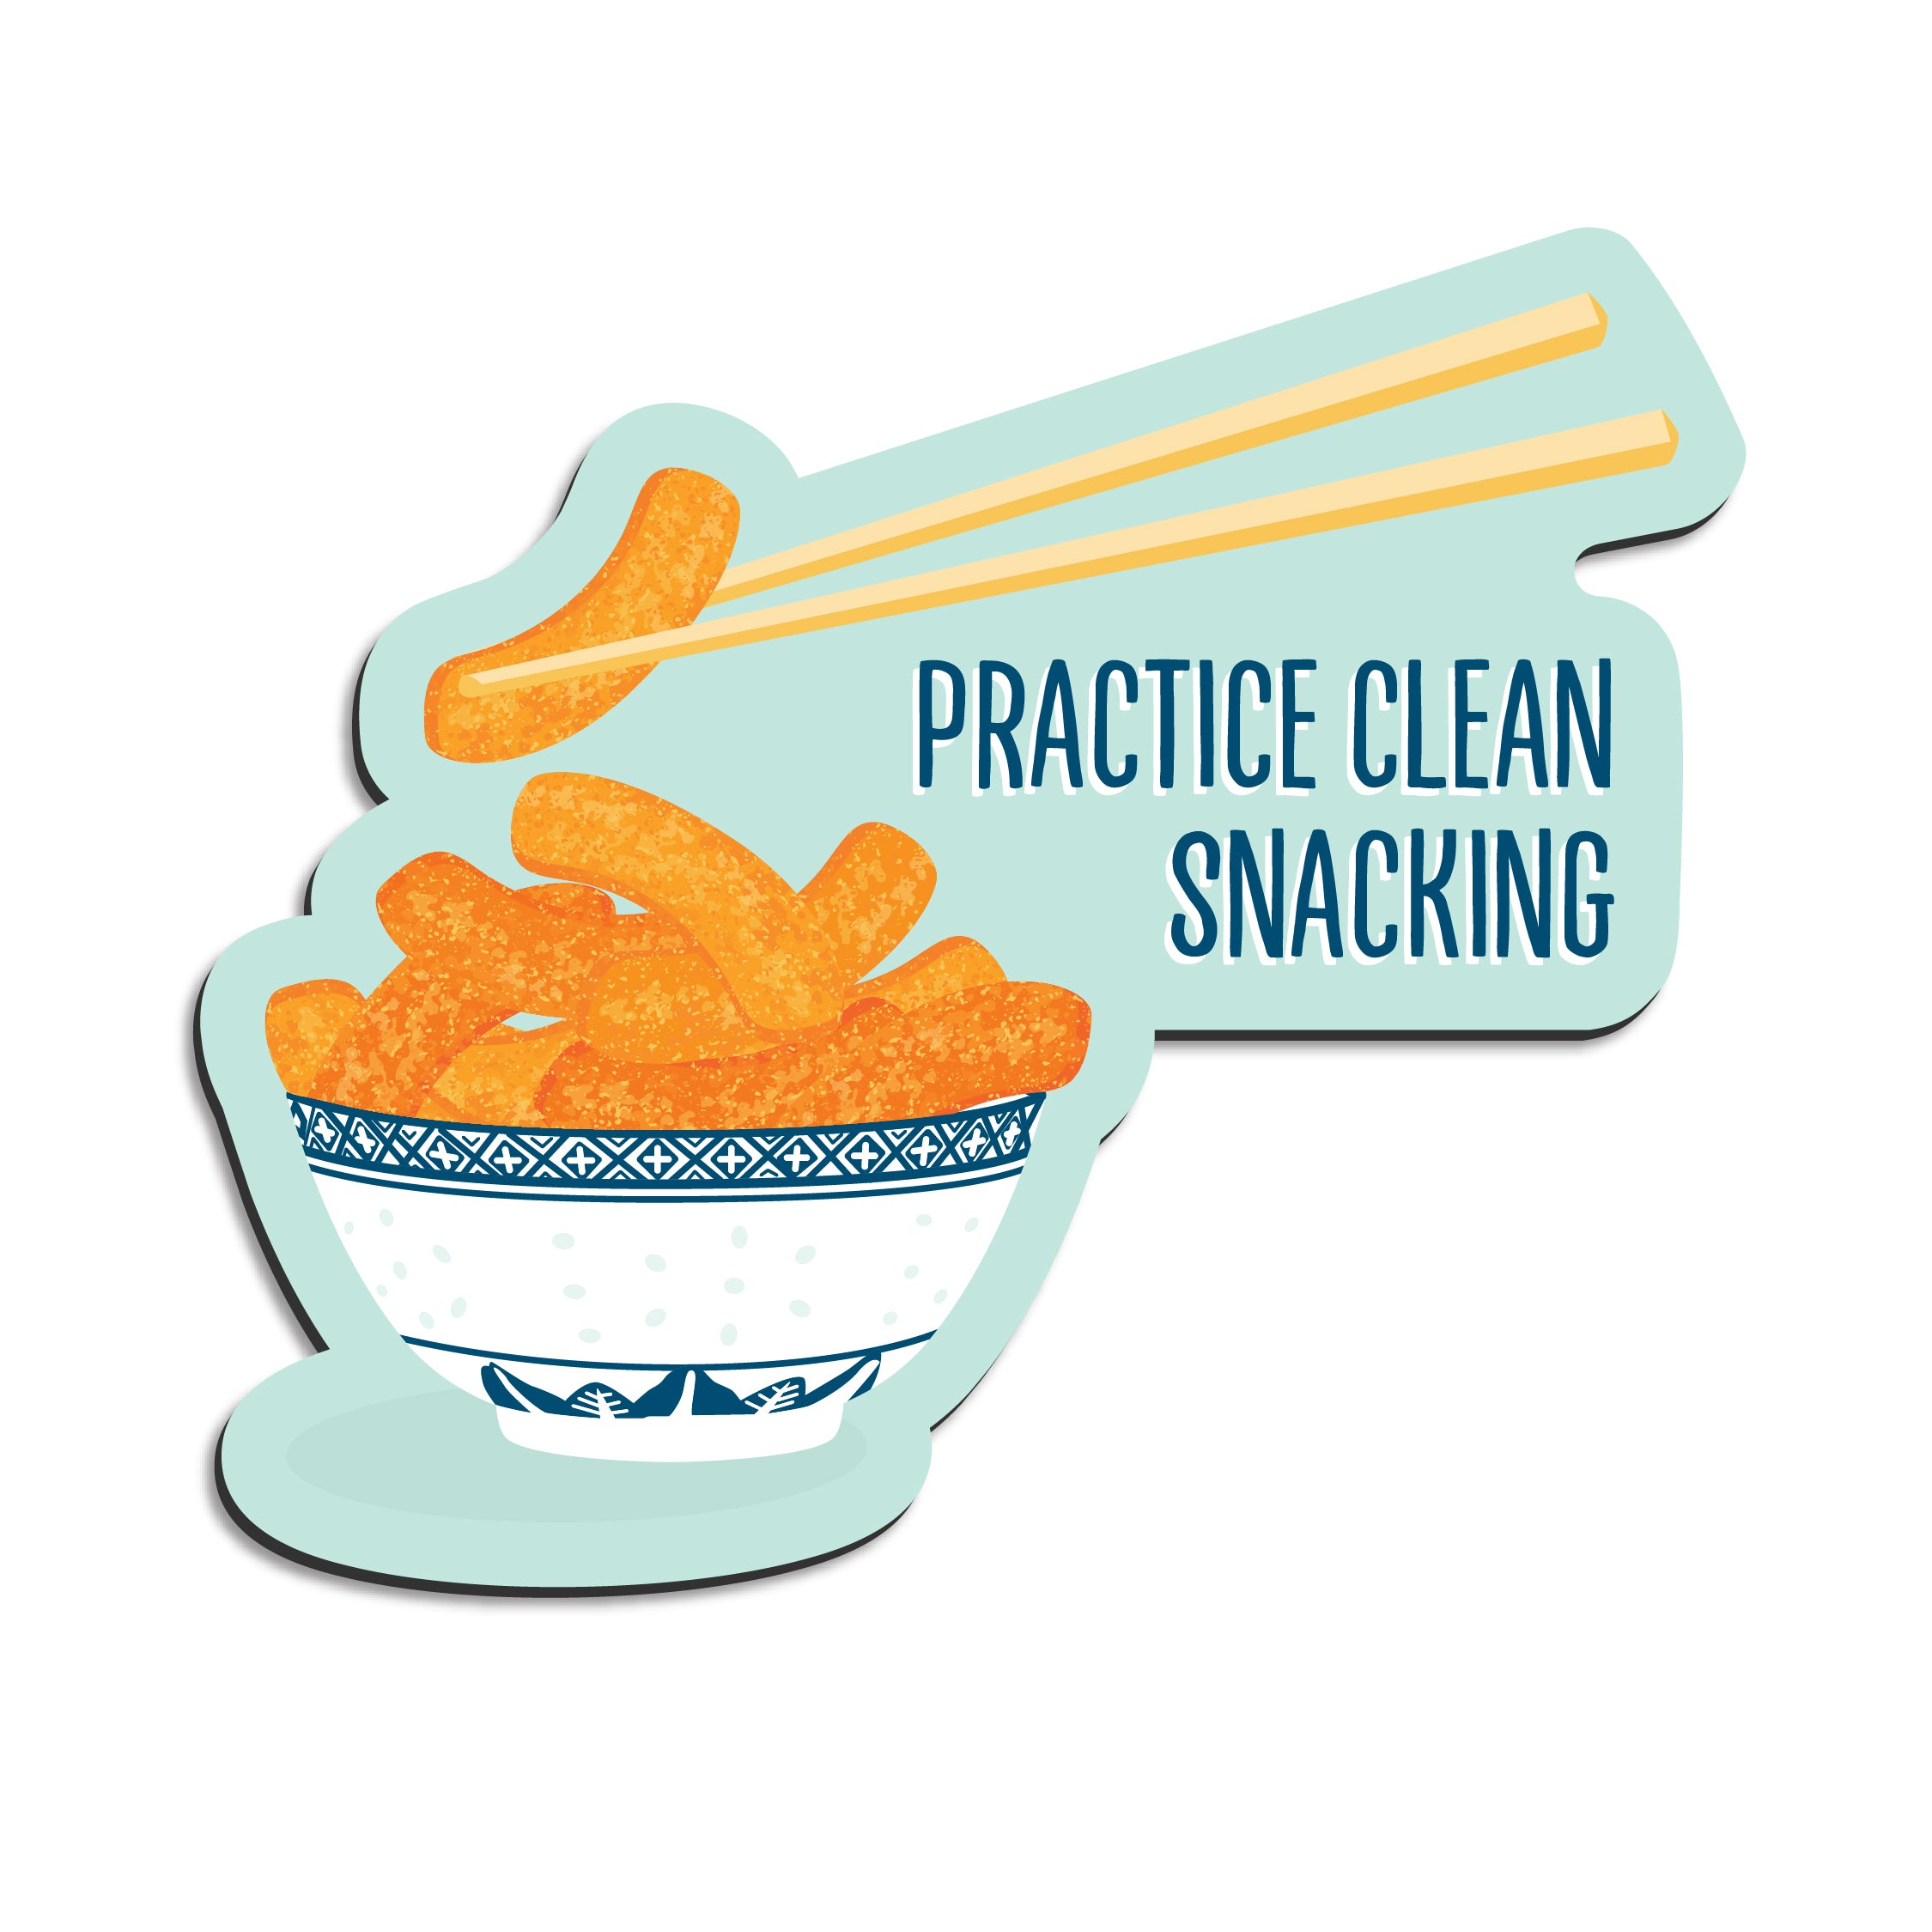 Practice clean snacking cheetos and chopsticks magnet